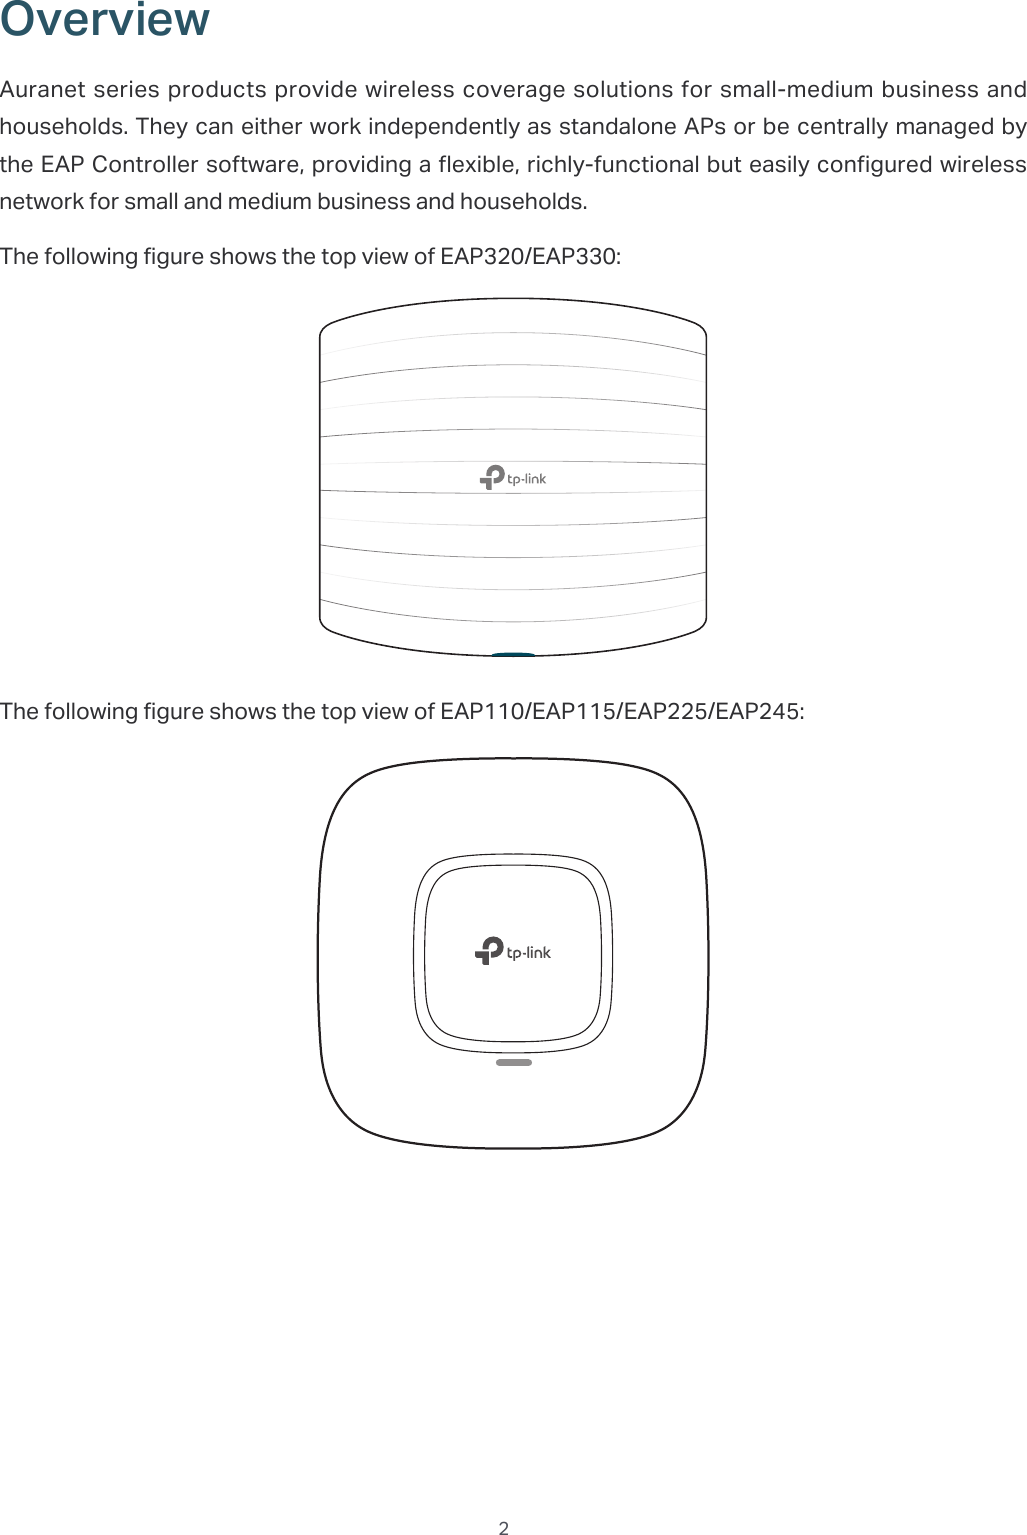  2OverviewAuranet series products provide wireless coverage solutions for small-medium business and households. They can either work independently as standalone APs or be centrally managed by the EAP Controller software, providing a flexible, richly-functional but easily configured wireless network for small and medium business and households.The following figure shows the top view of EAP320/EAP330:The following figure shows the top view of EAP110/EAP115/EAP225/EAP245: